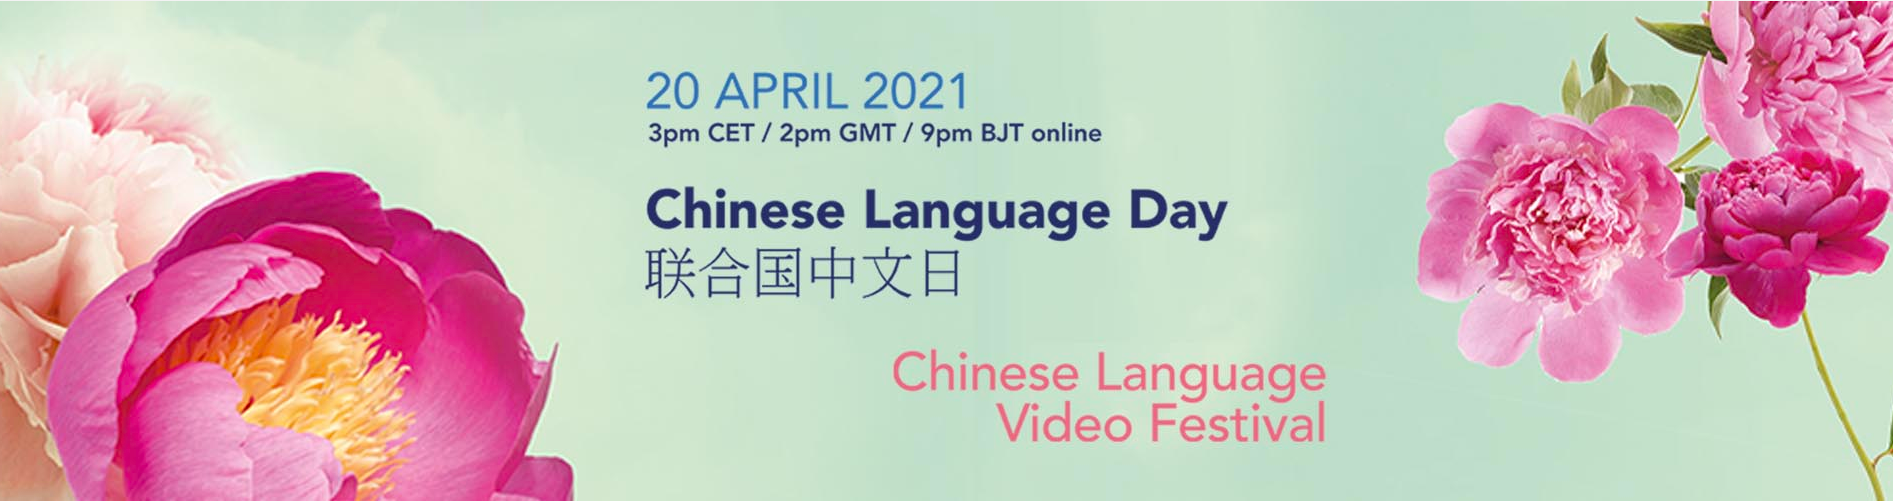 Chinese Language Day & First CMG